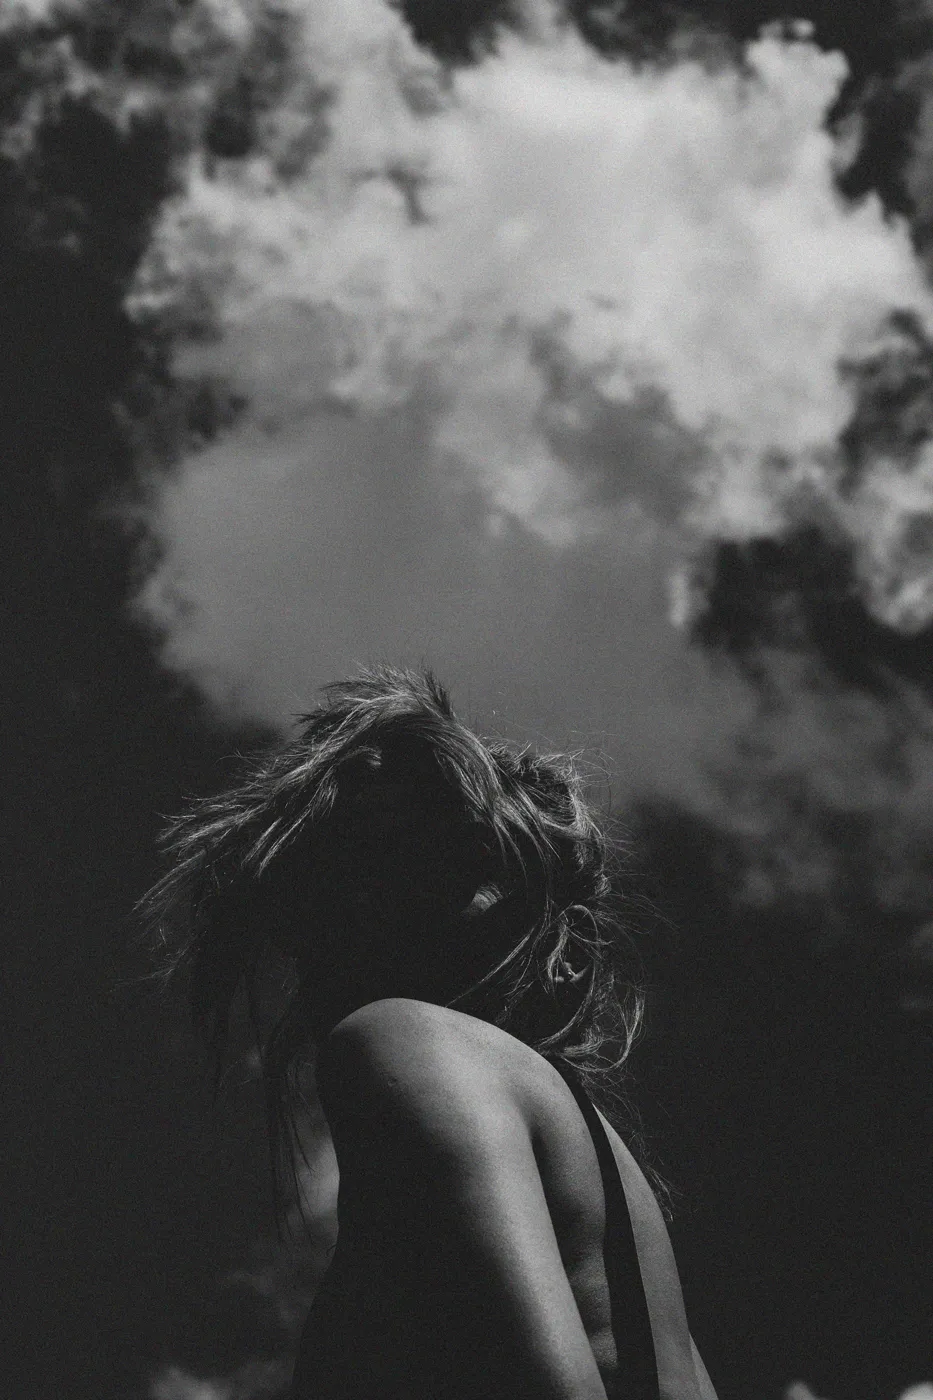 low angle of a photo of a woman. Half the image its her, the other half its a sky with clouds. Shot on black and white